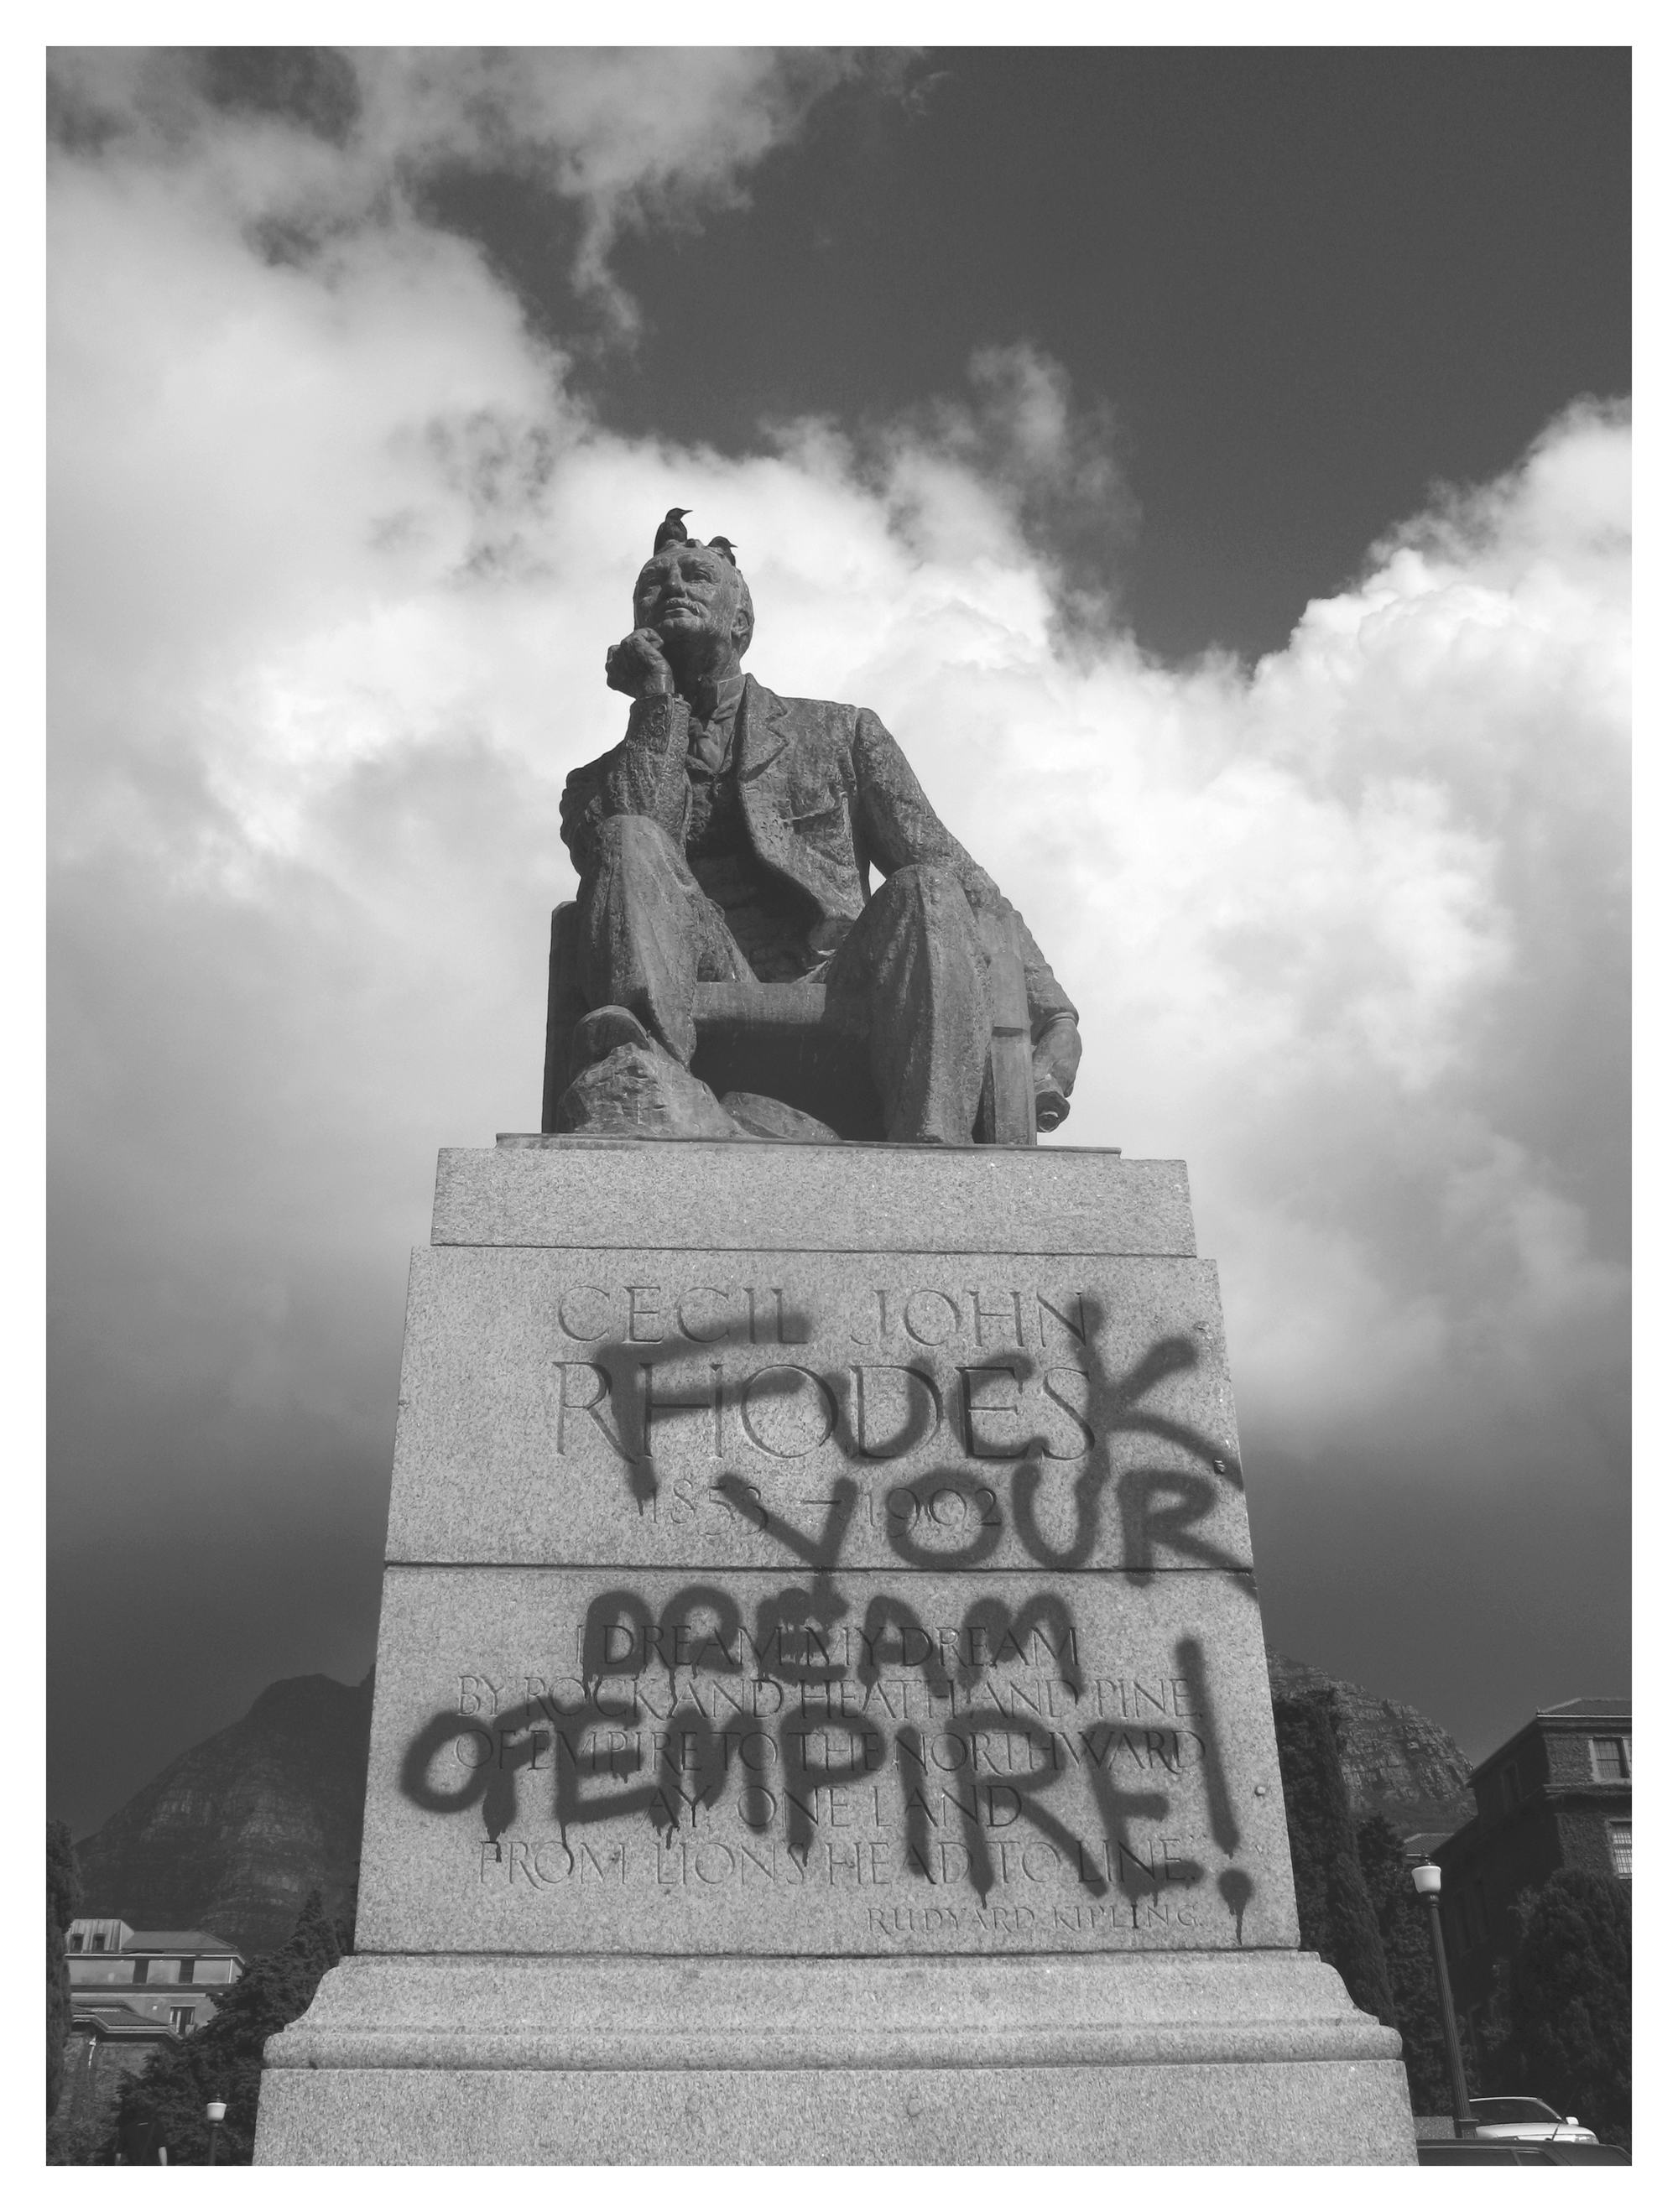 Black and white photo of the Rhodes statue in Cape Town with 'Fuck your Dream of Empire' written on it with grafitti